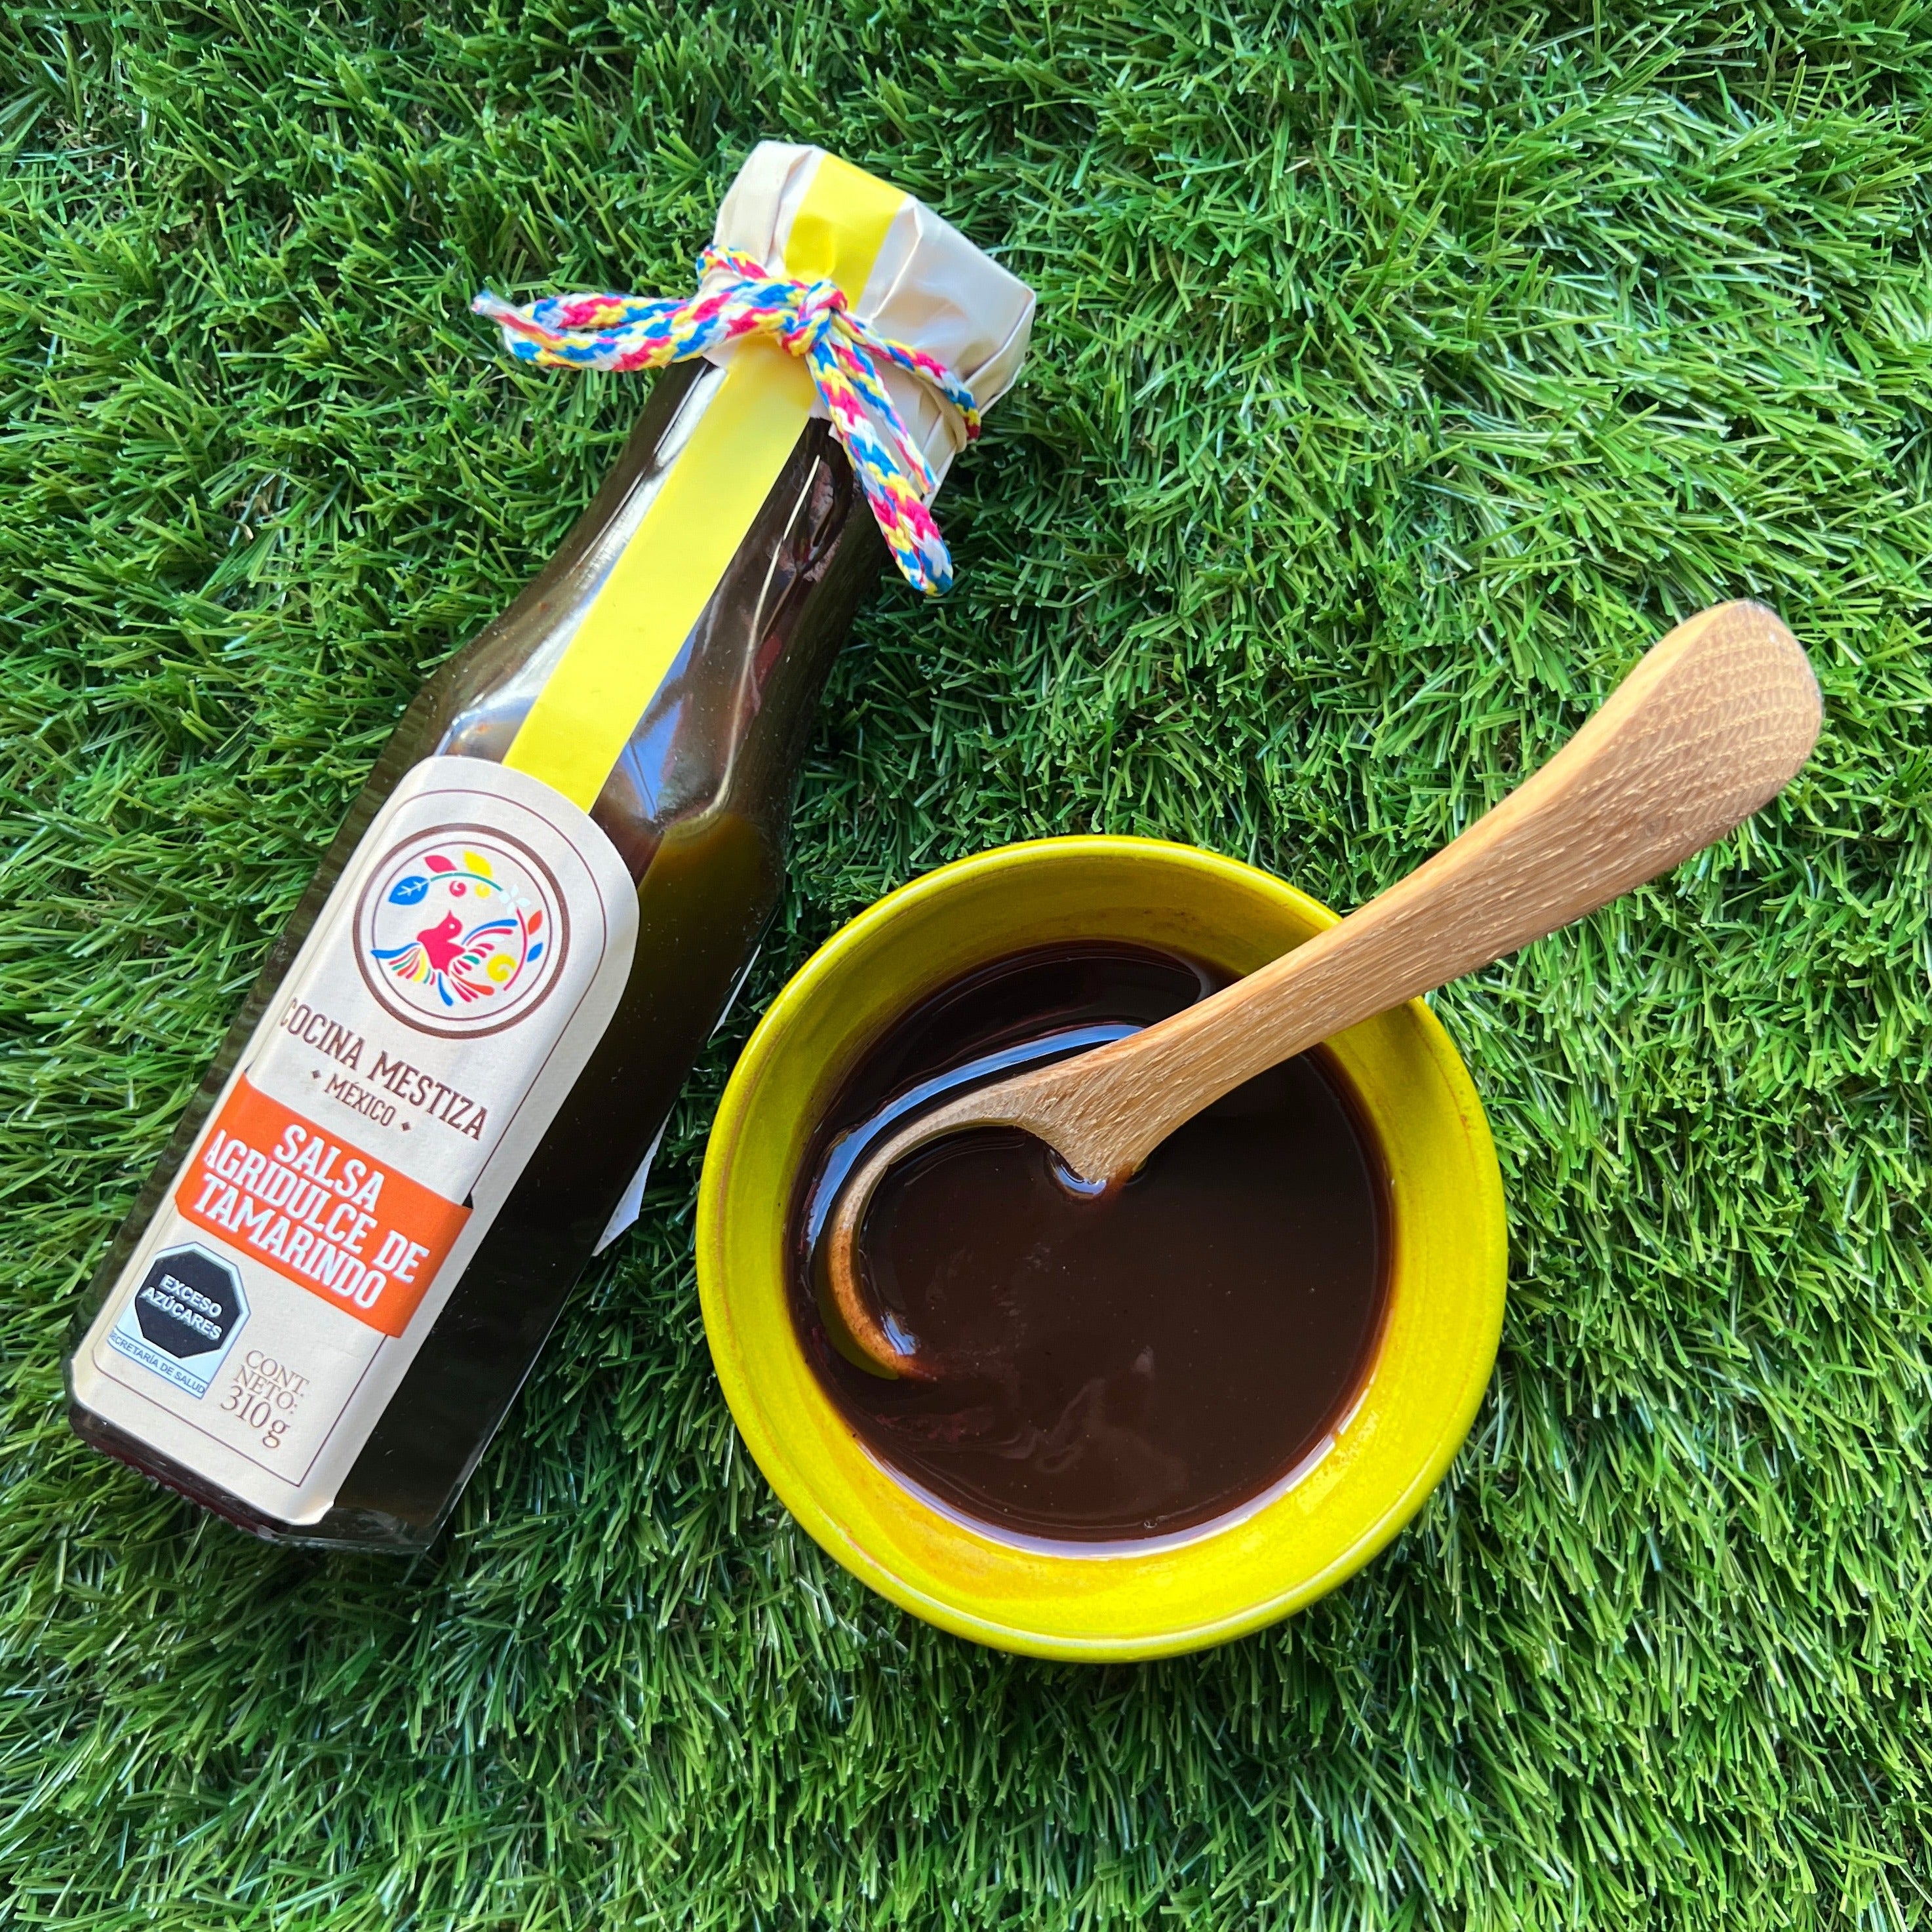 A bottle of Tamarind Sweet & Sour Sauce with a small green bowl with salsa and a wooden spoon. All laid down on green grass